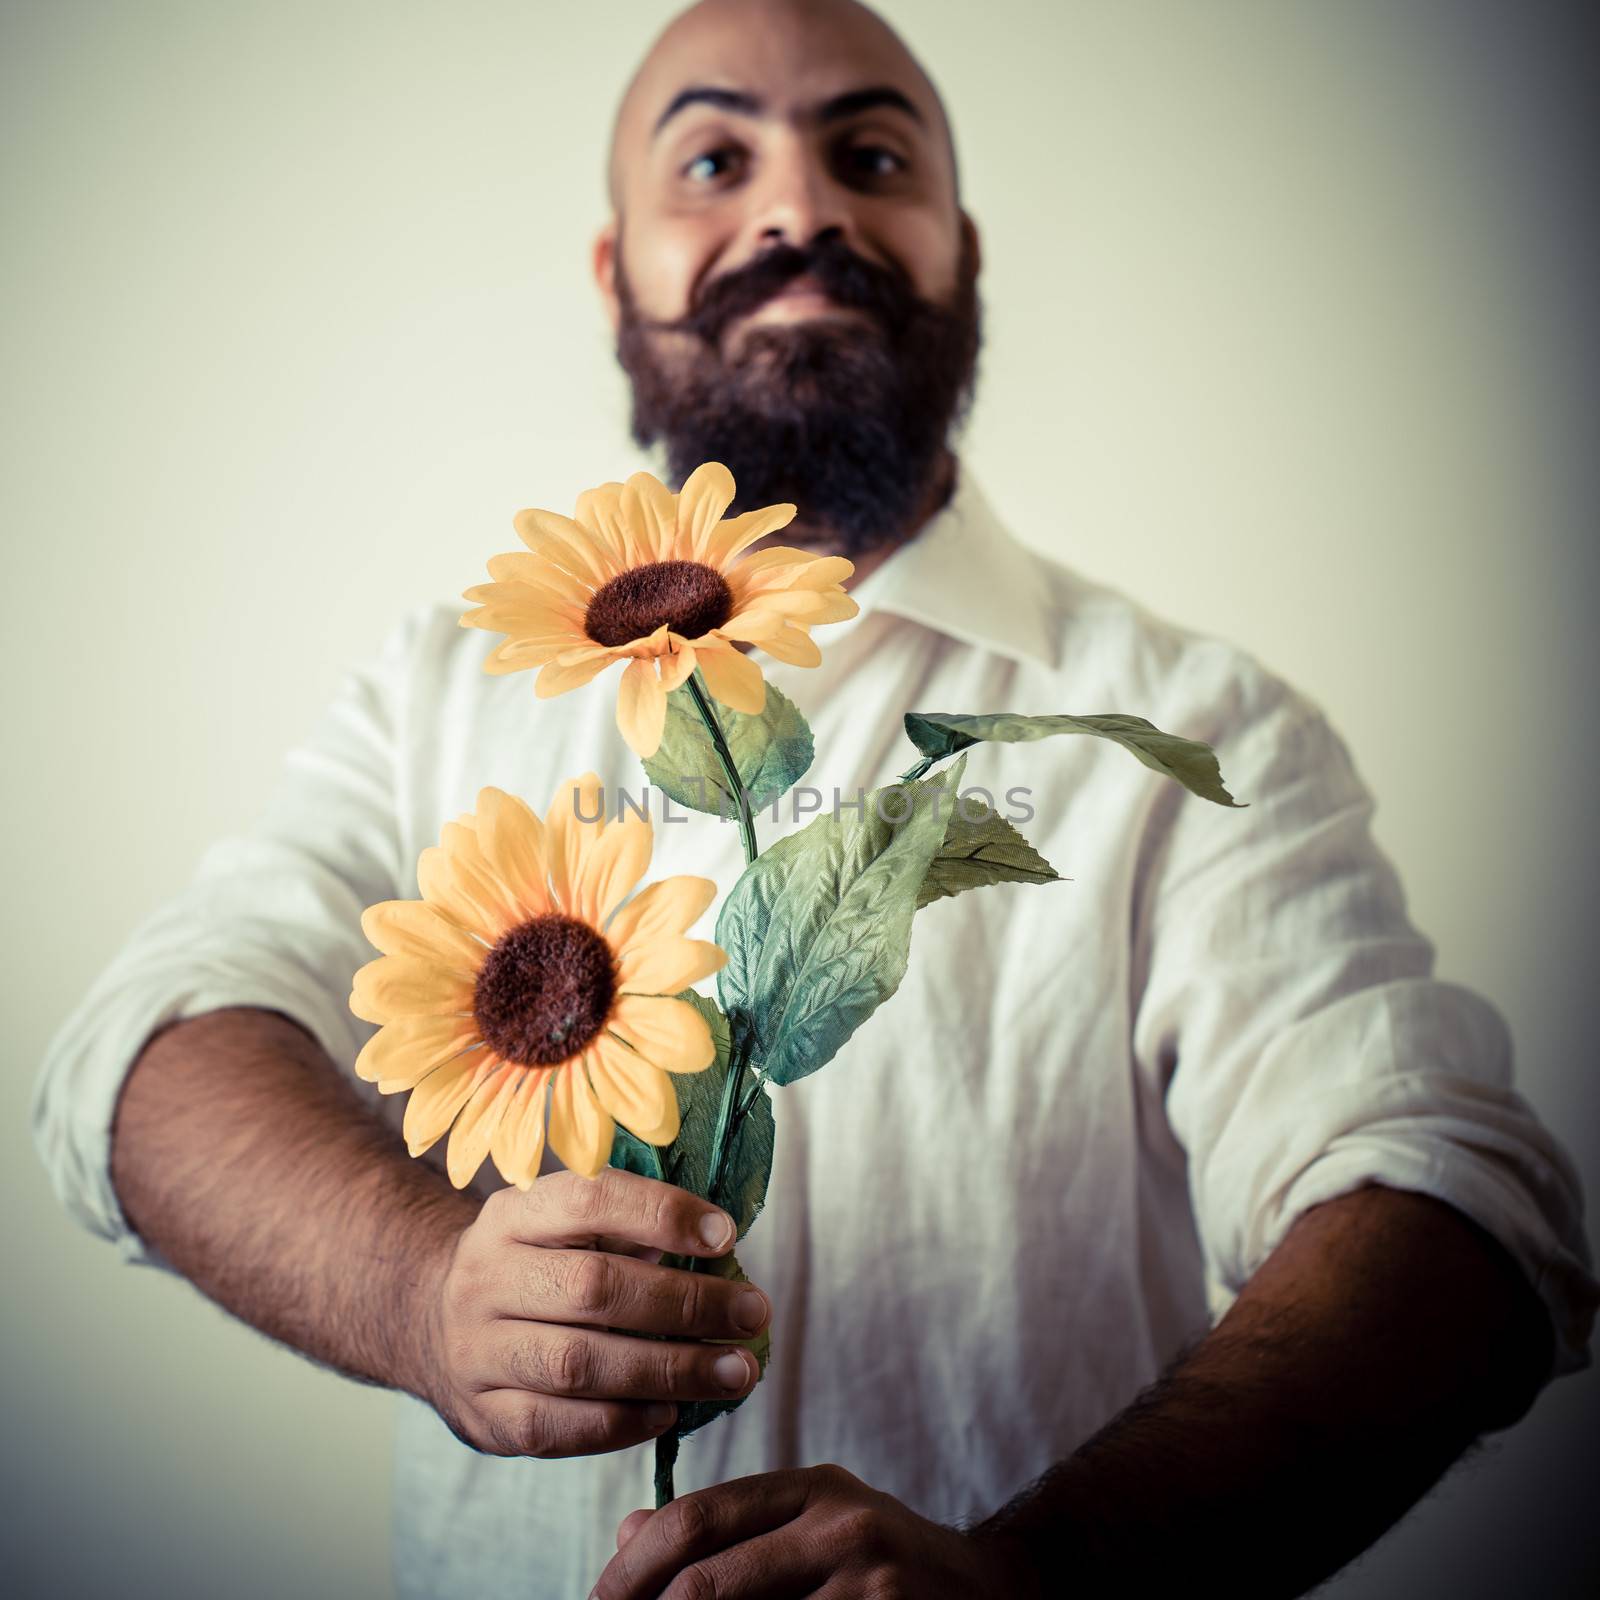 long beard and mustache man giving flowers on gray background